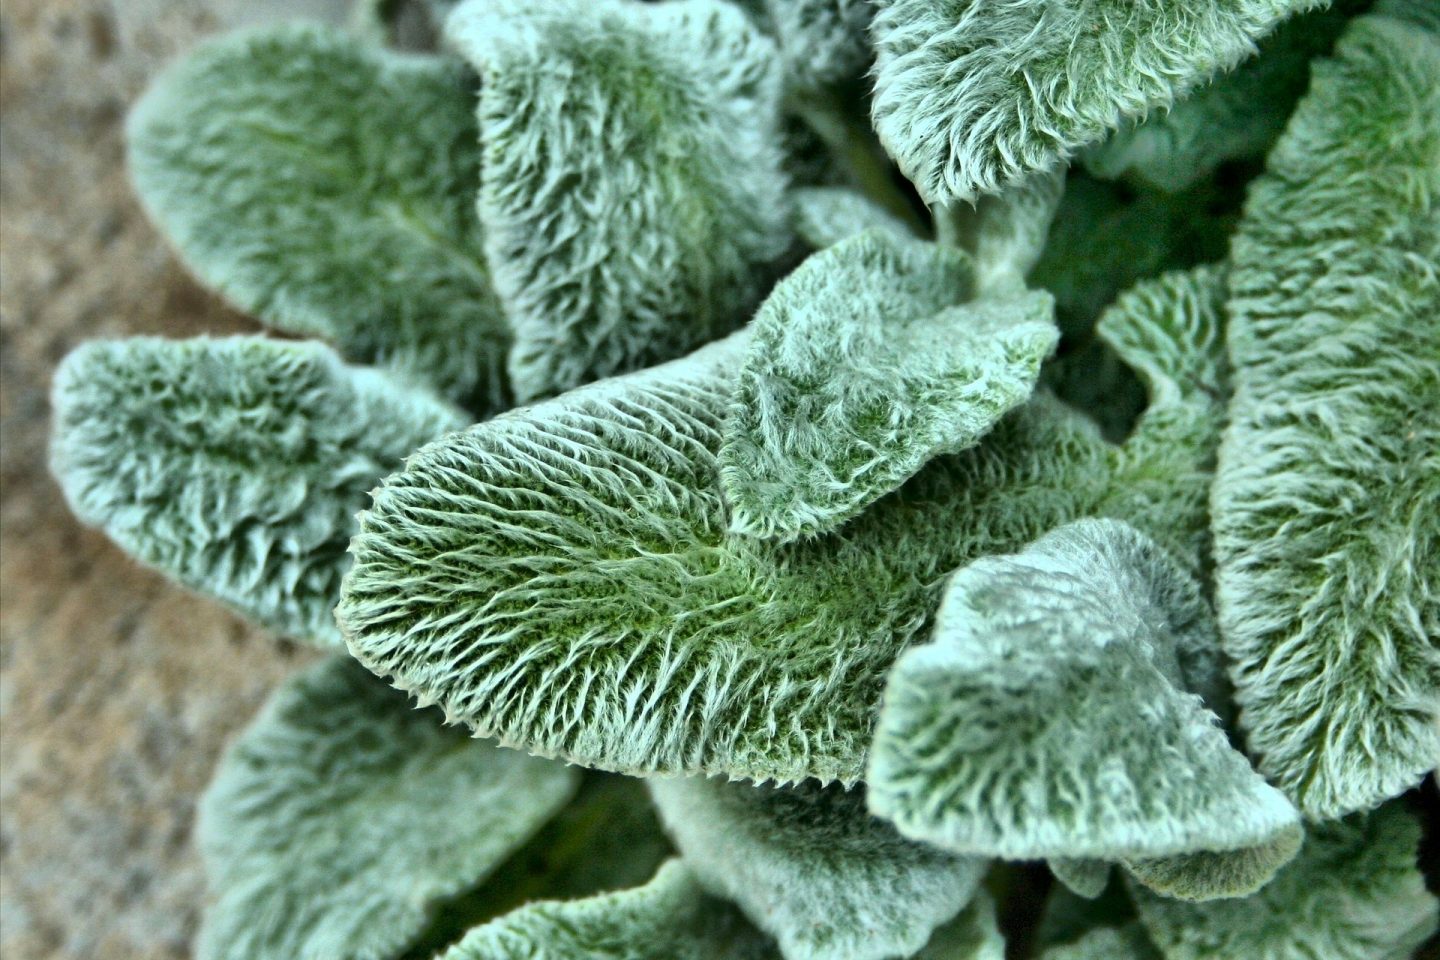 Engaging sense of touch lambs ears